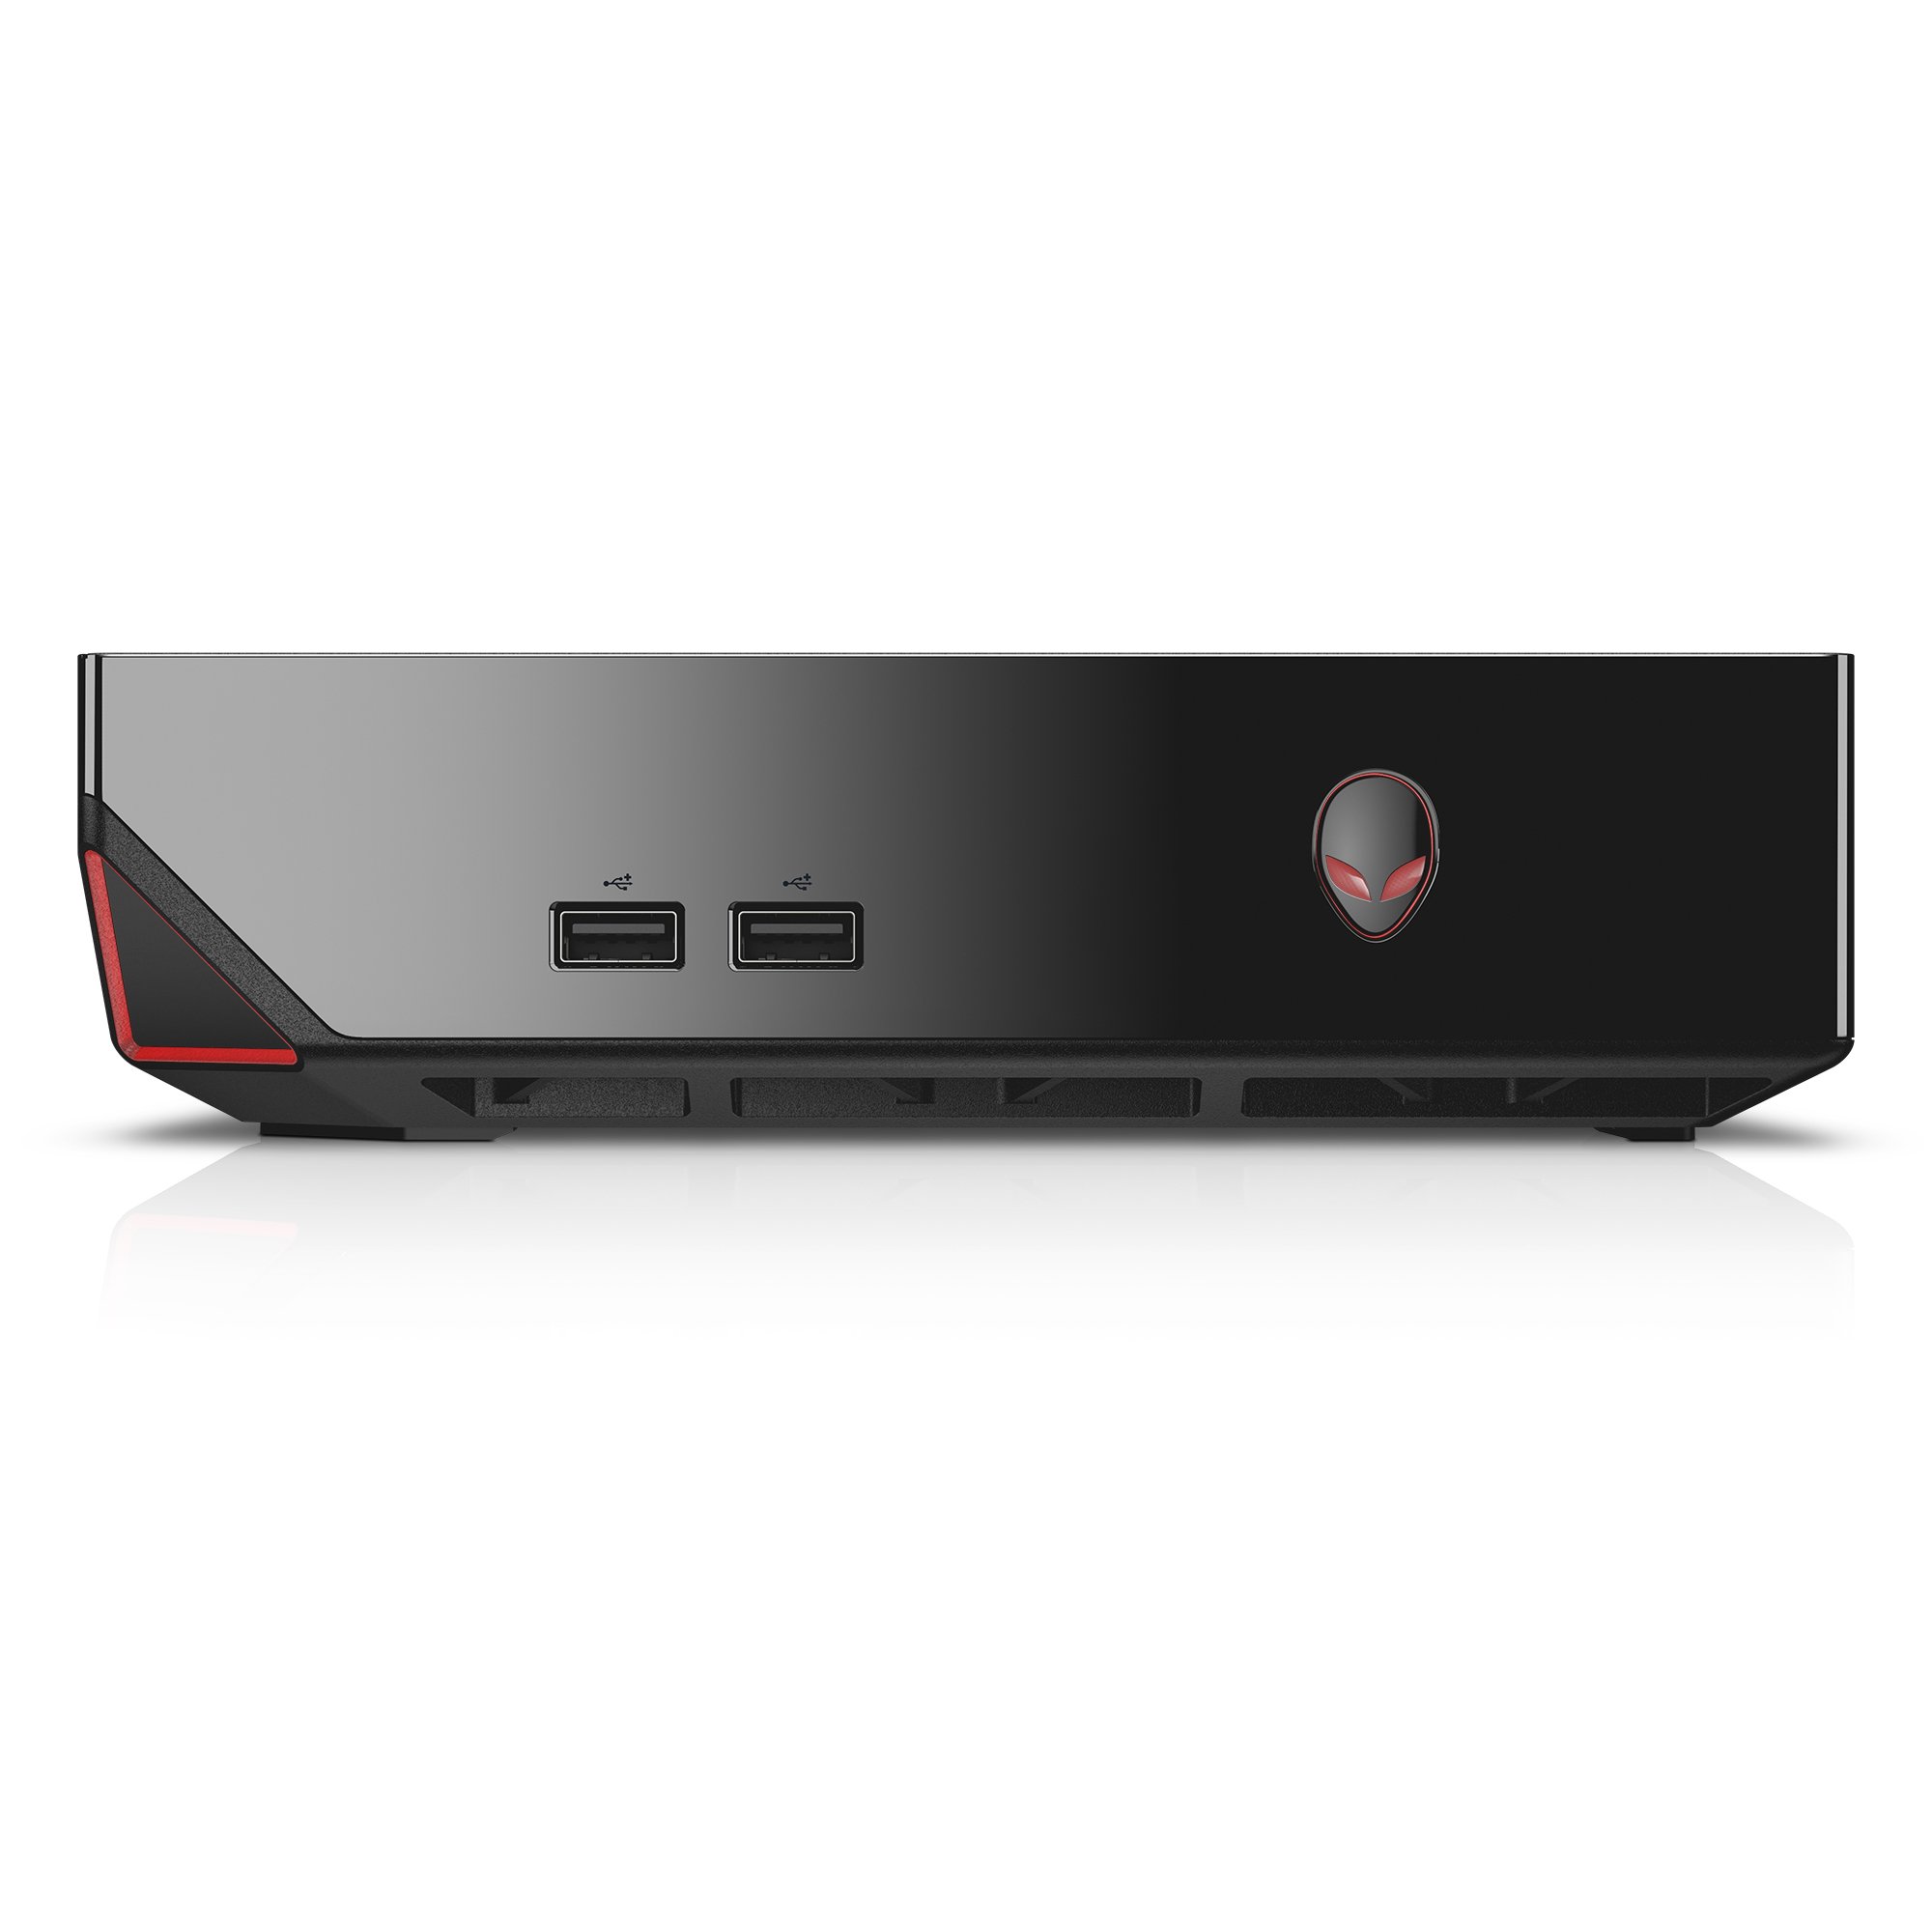 Alienware Alpha ASM100-4980 Console (Discontinued by Manufacturer)